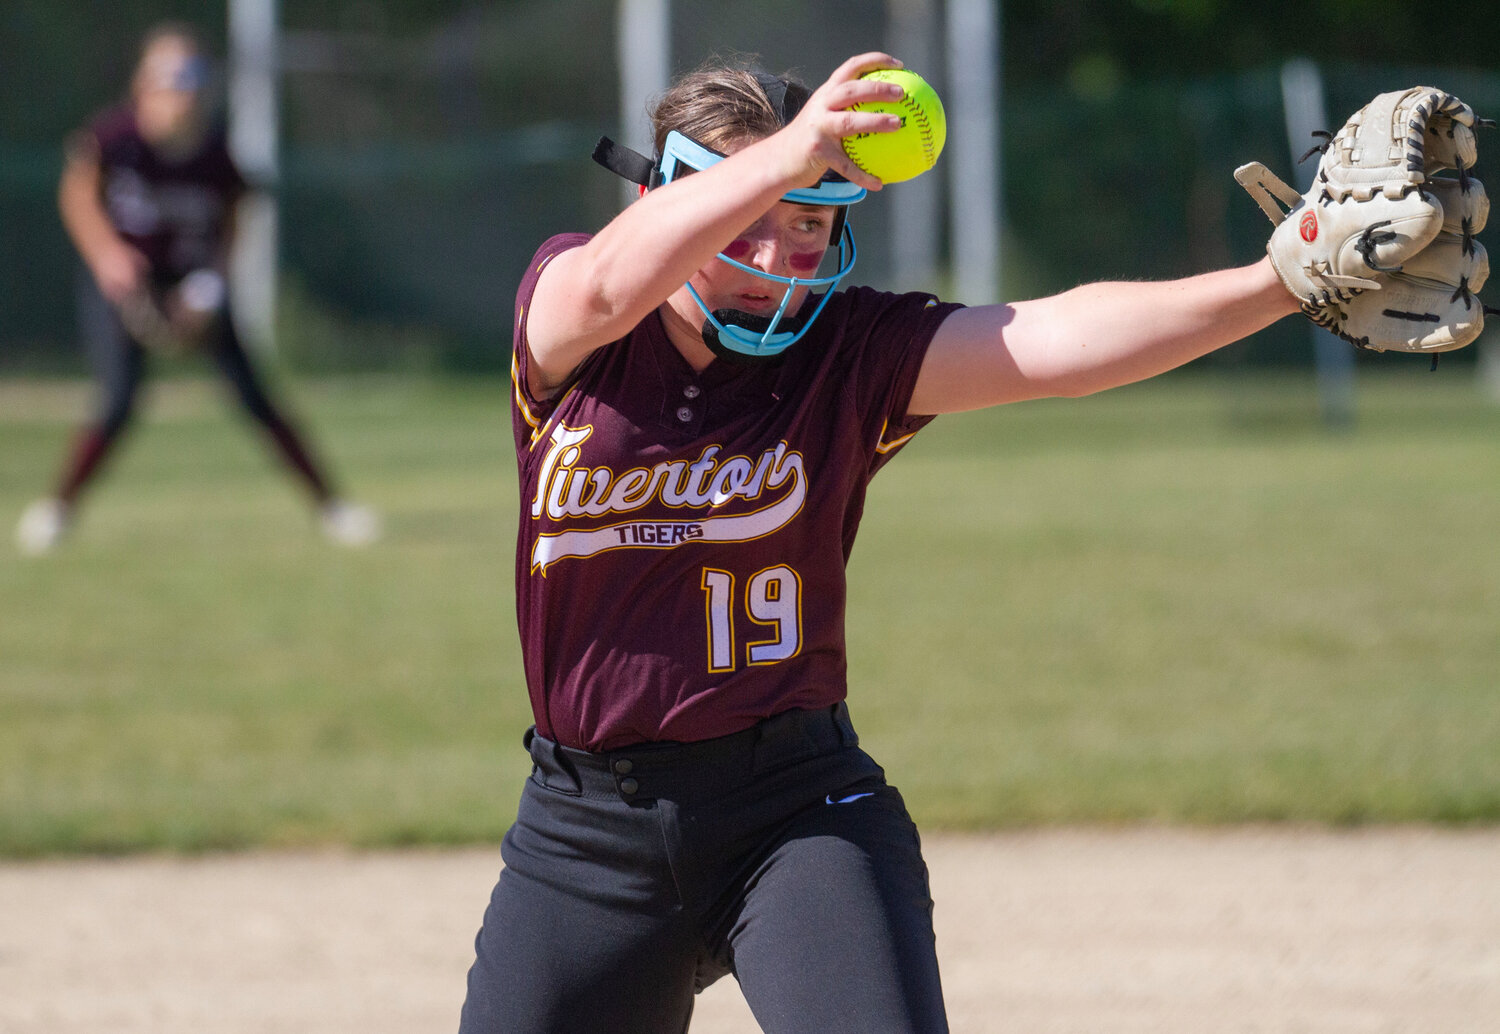 Abbie DeMello relieved freshman pitcher Lia Doster in the fourth inning and shut the Mounties down the rest of the way, striking out 5 and allowing just 3 hits, 2 walks and 0 runs in 4 innings of work. 